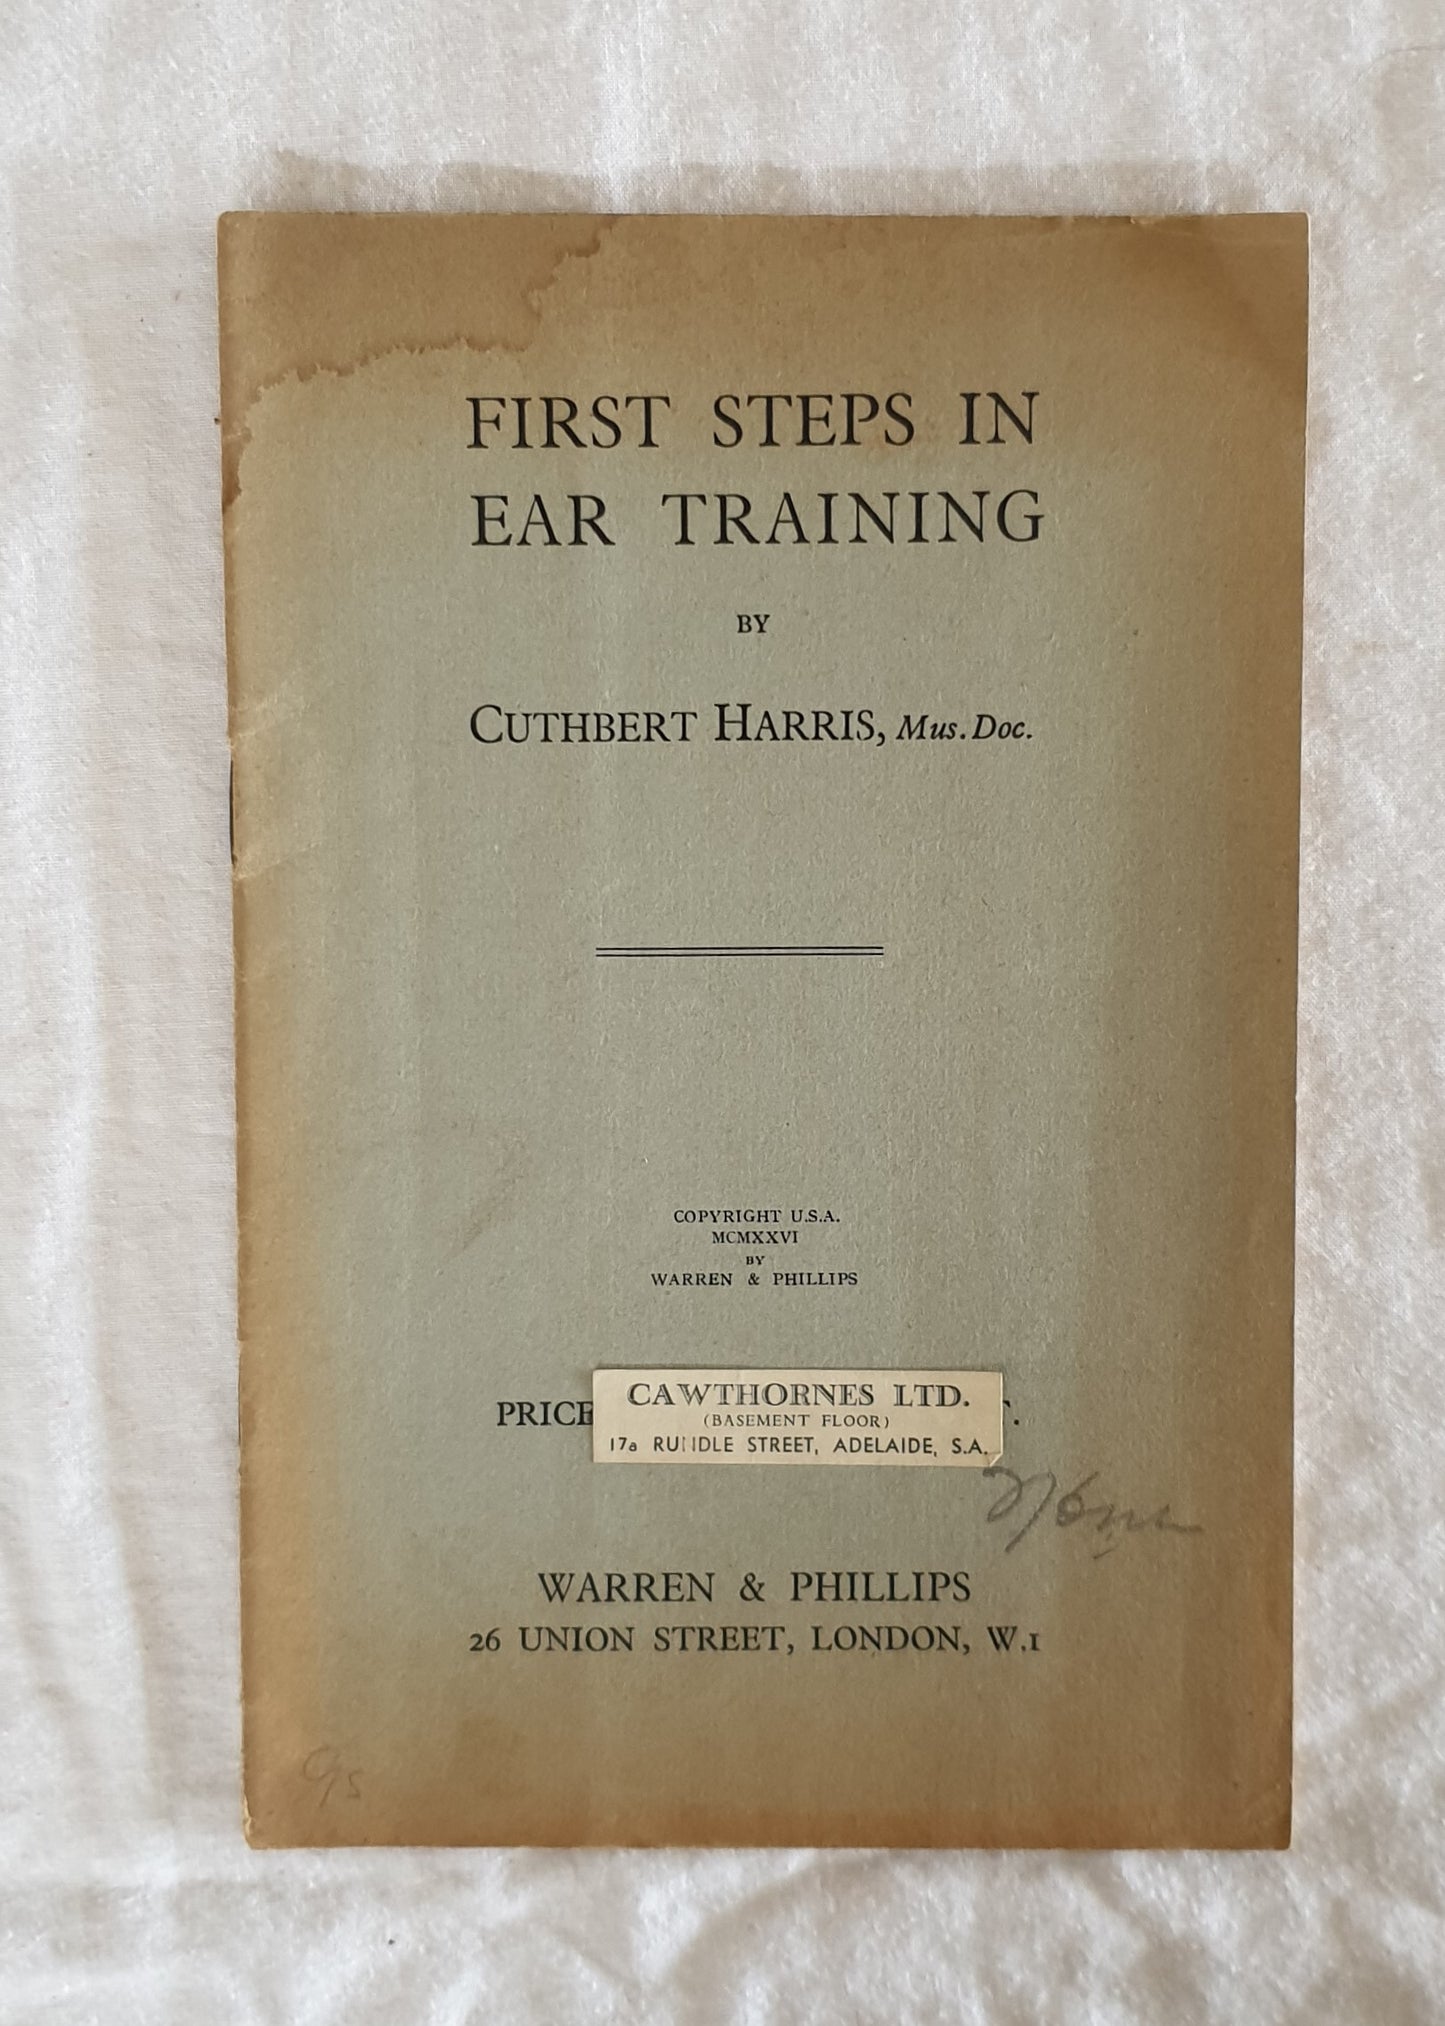 First Steps in Ear Training  by Cuthbert Harris